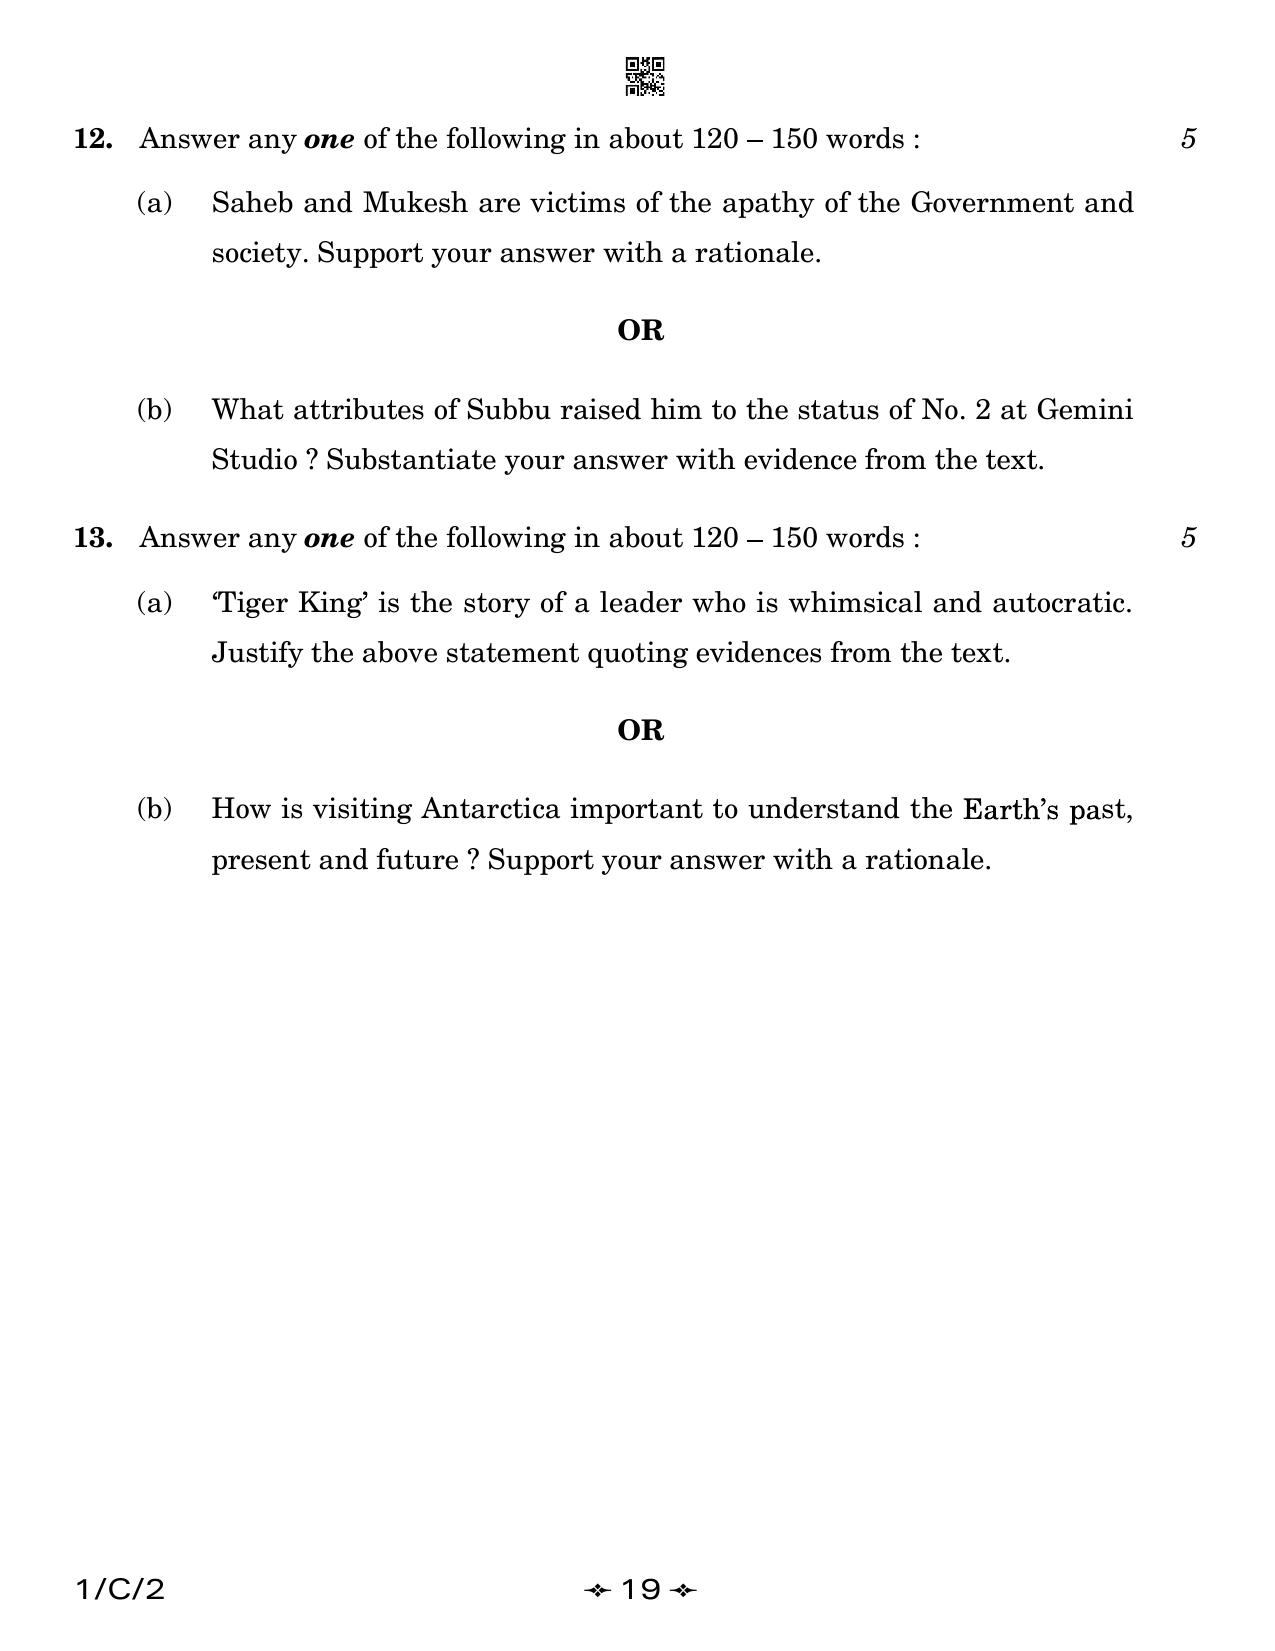 CBSE Class 12 1-2 English Core 2023 (Compartment) Question Paper - Page 19